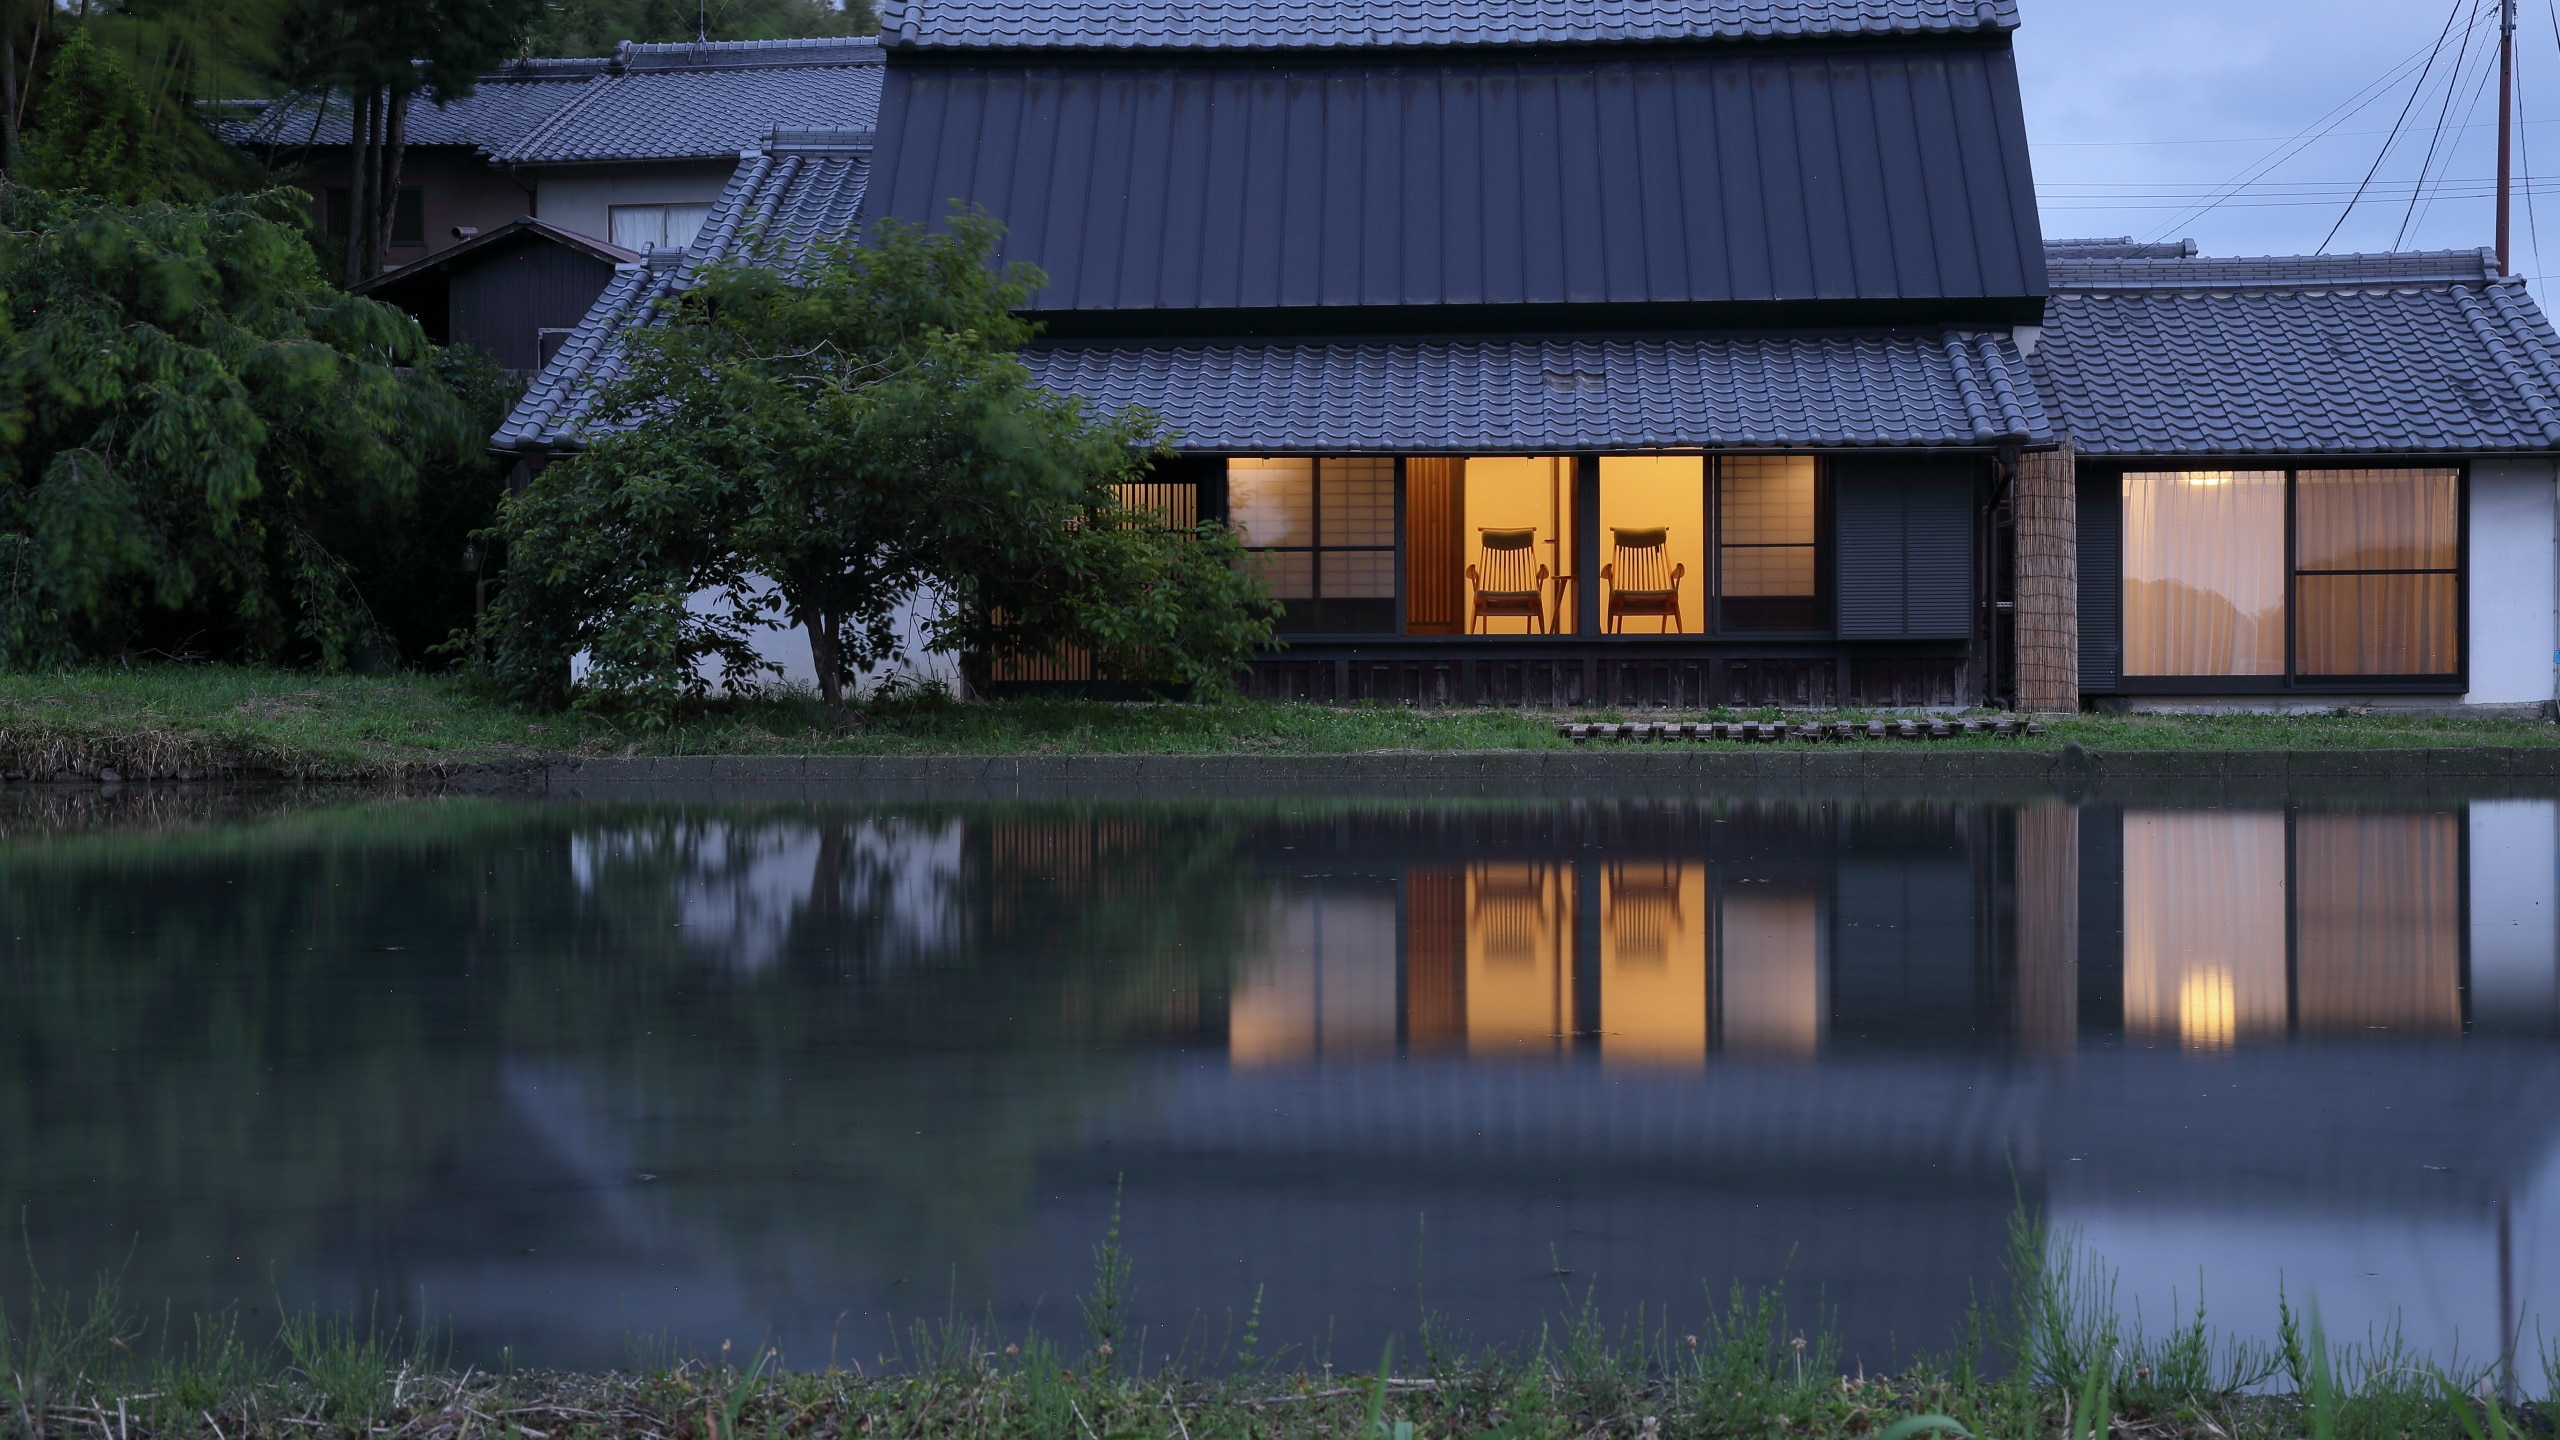 Guest room building reflected in the rice fields approaching dusk